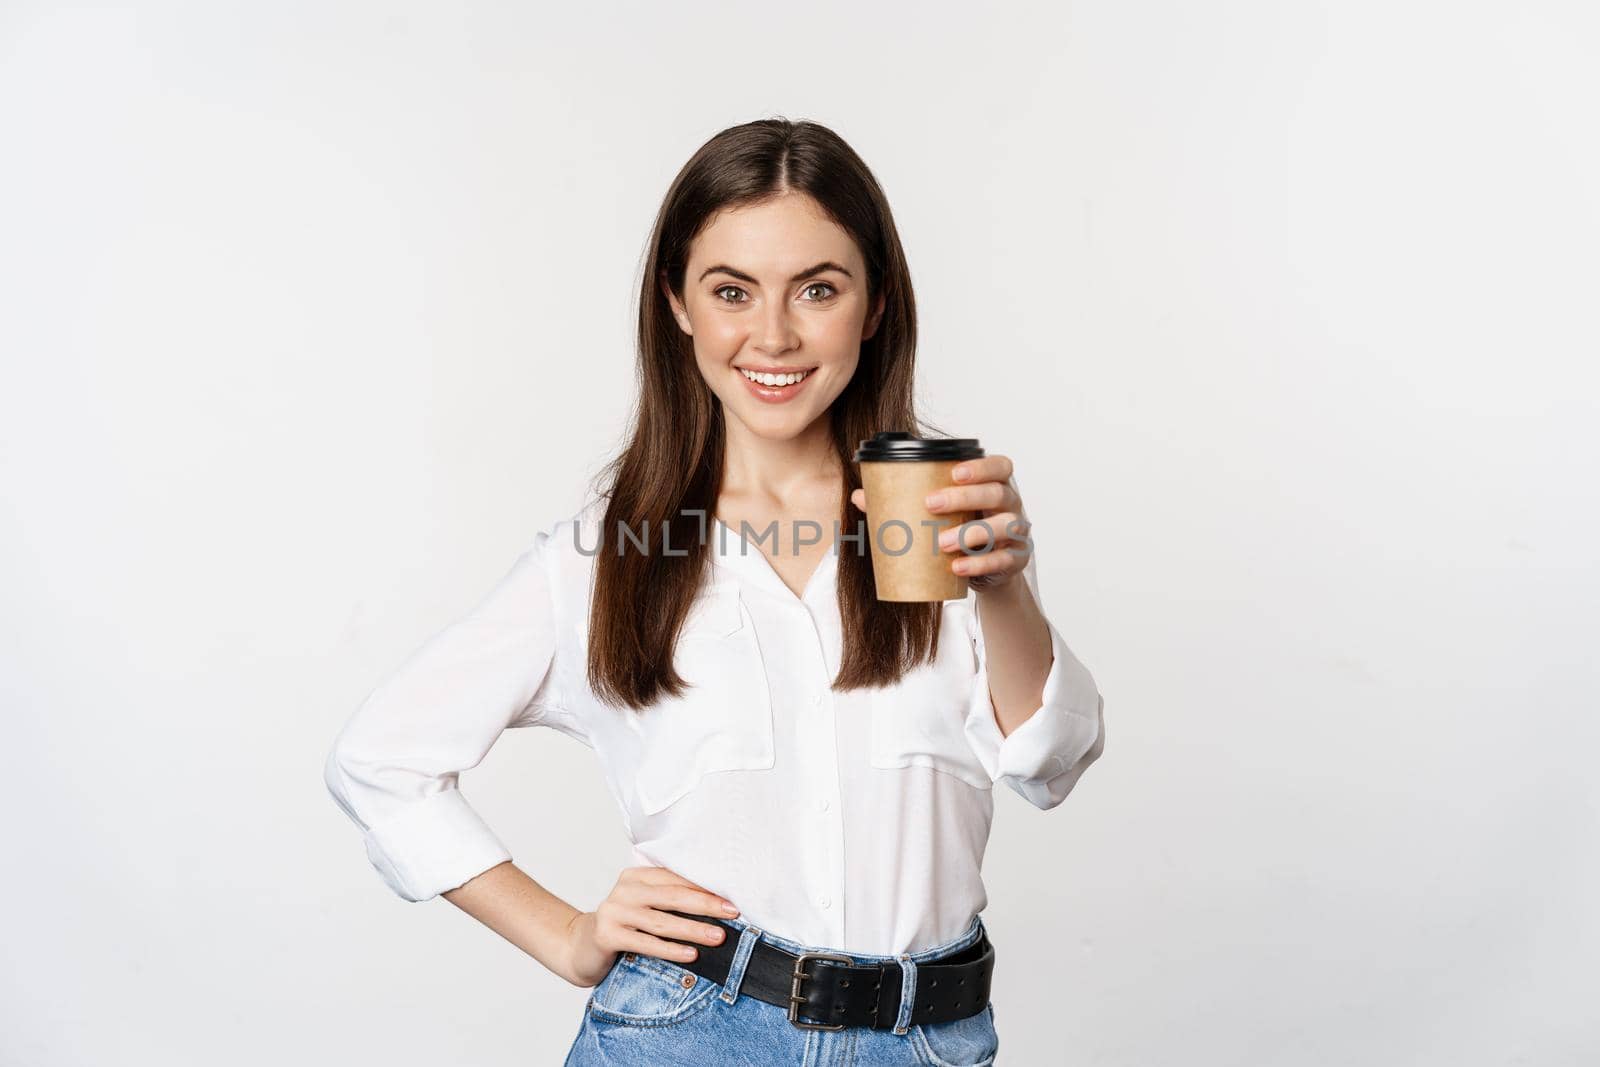 Image of modern woman, office lady holding takeaway coffee cup and smiling, standing over white background.